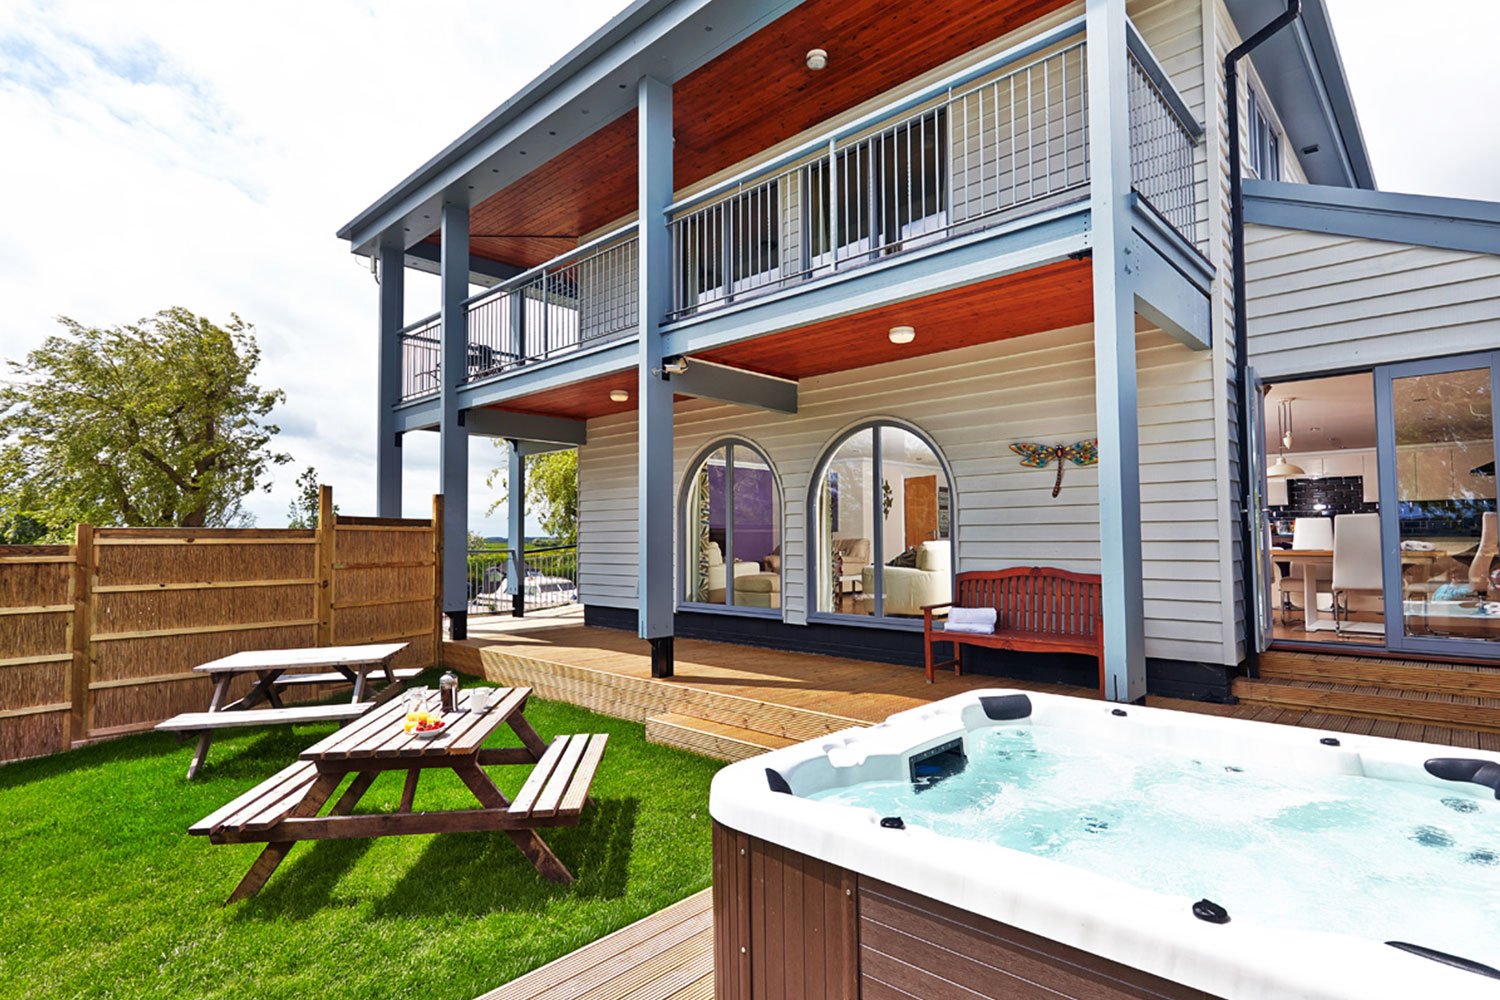 Waveney-River-Centre-outside-area-with-hot-tub.jpg